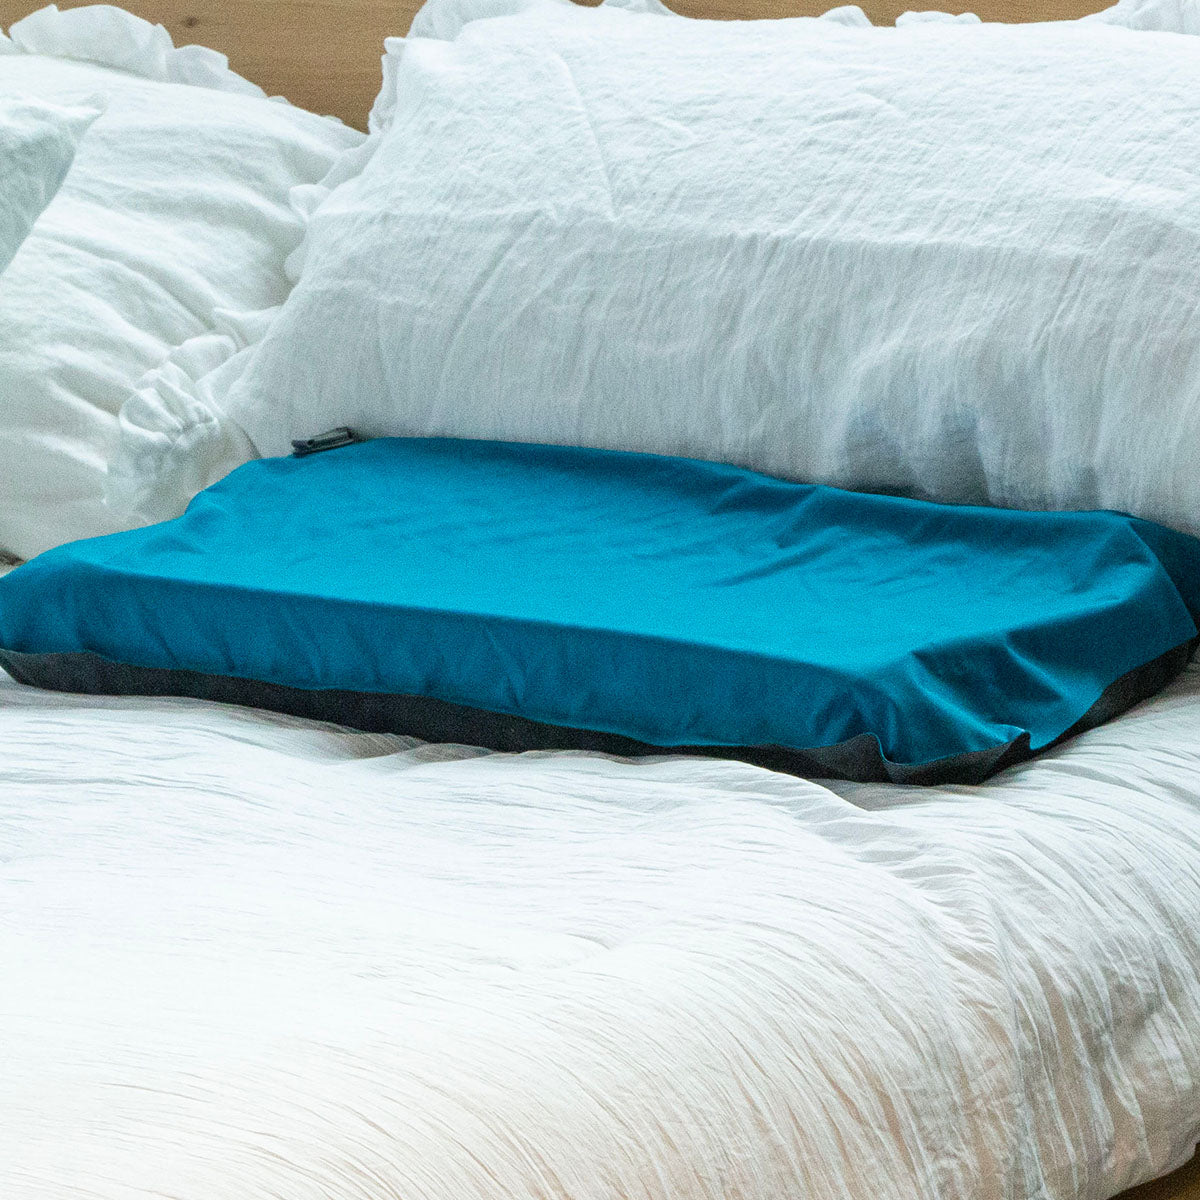 ColdBed Pillow – The Coldest Pillow On Earth